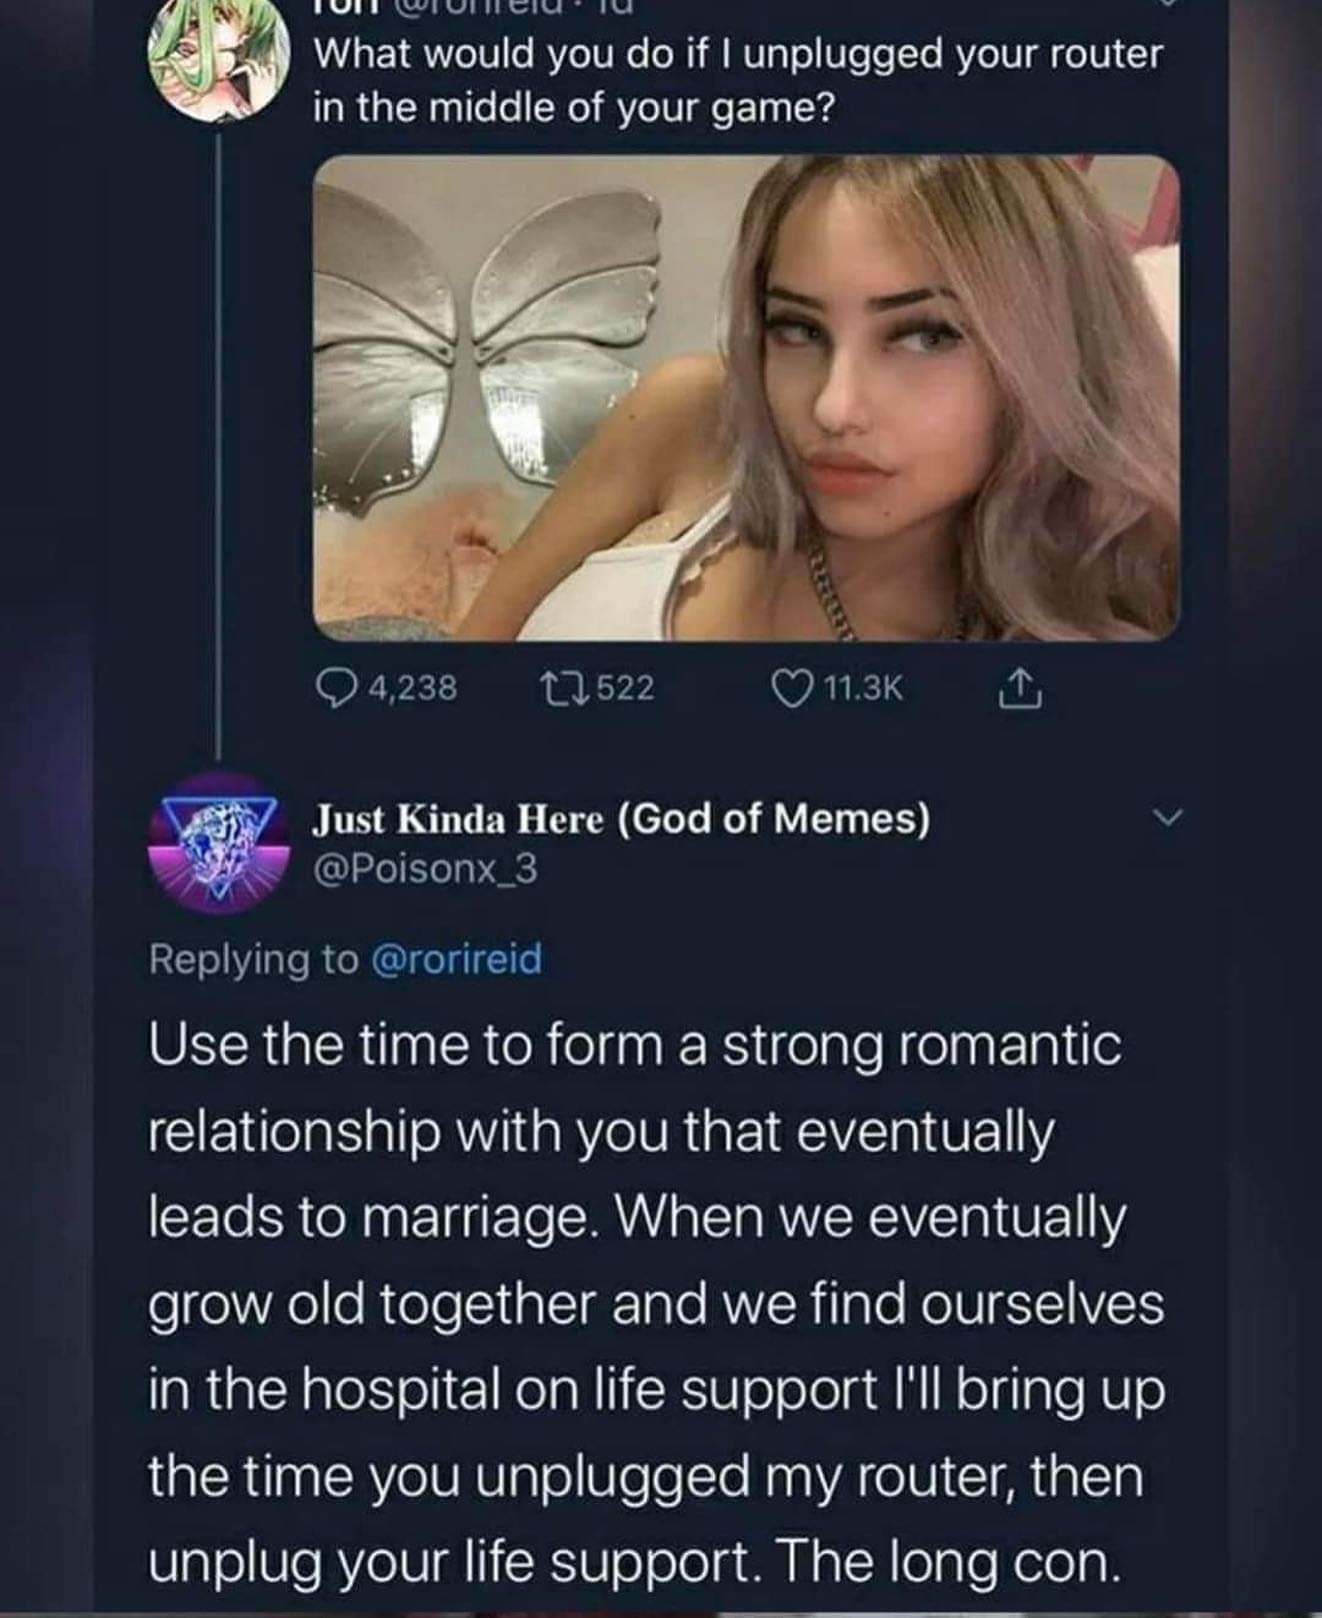 photo caption - TUUWIUTeiului What would you do if I unplugged your router in the middle of your game? 4,238 27522 V 1 Just Kinda Here God of Memes Use the time to form a strong romantic relationship with you that eventually leads to marriage. When we eve